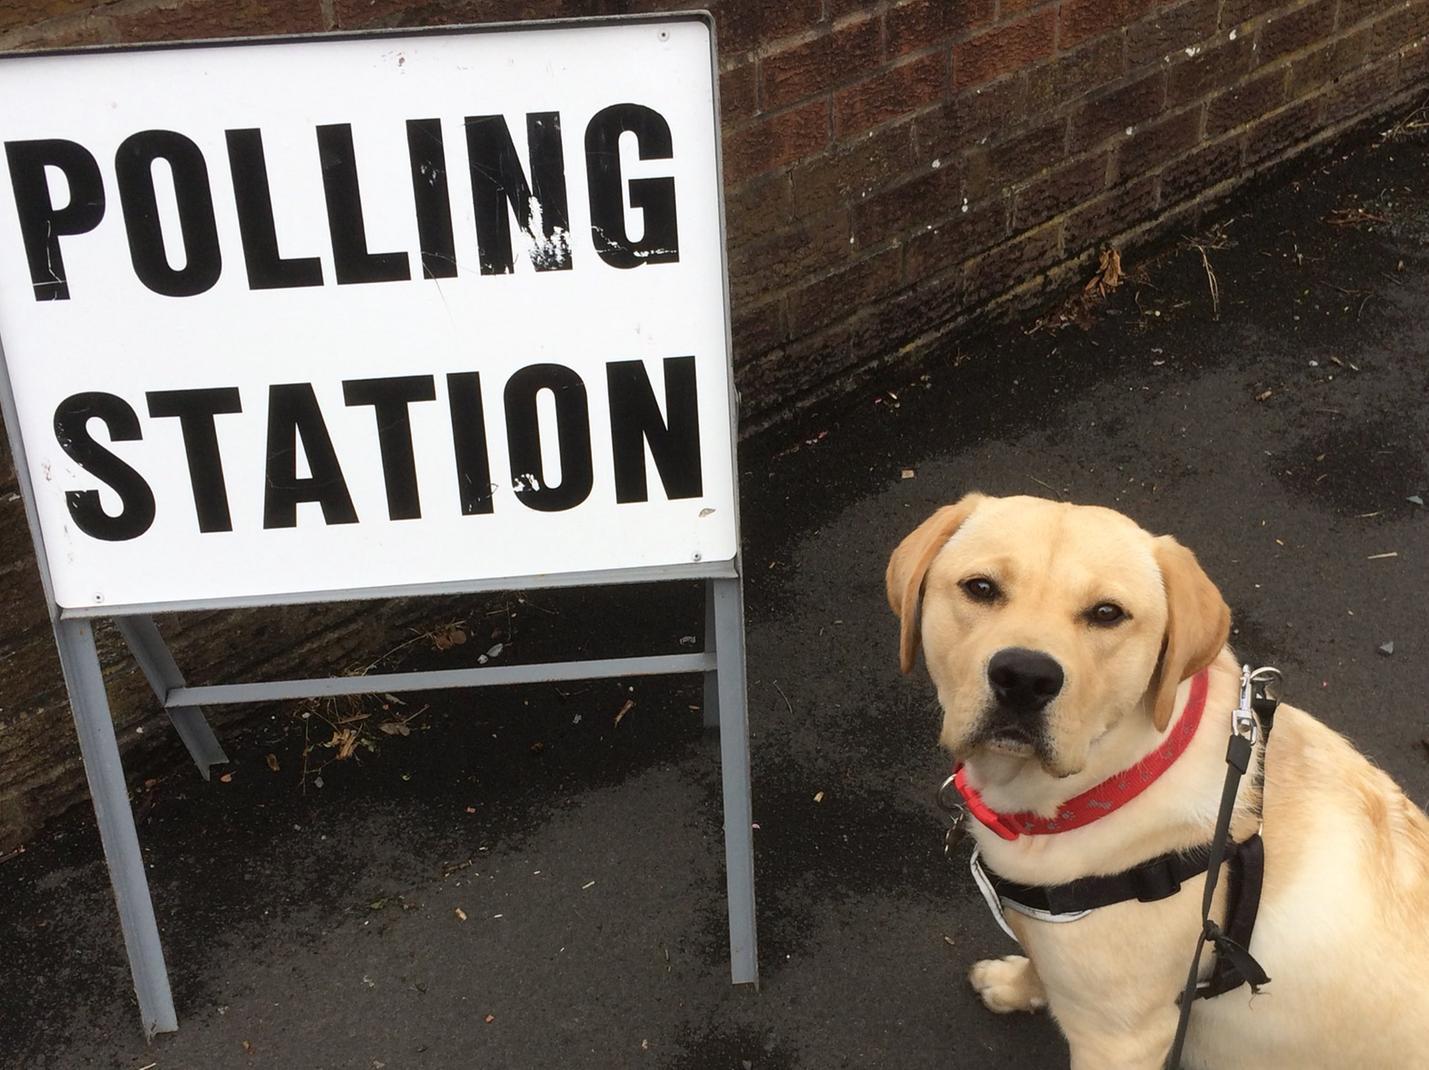 Lesley Cann from Preston (@LesleyCann) shared this pic to Twitter with the message: "@DogsTrust Today's election is important for everyone, even dogs! Go vote folks. #dogsatpollingstations"